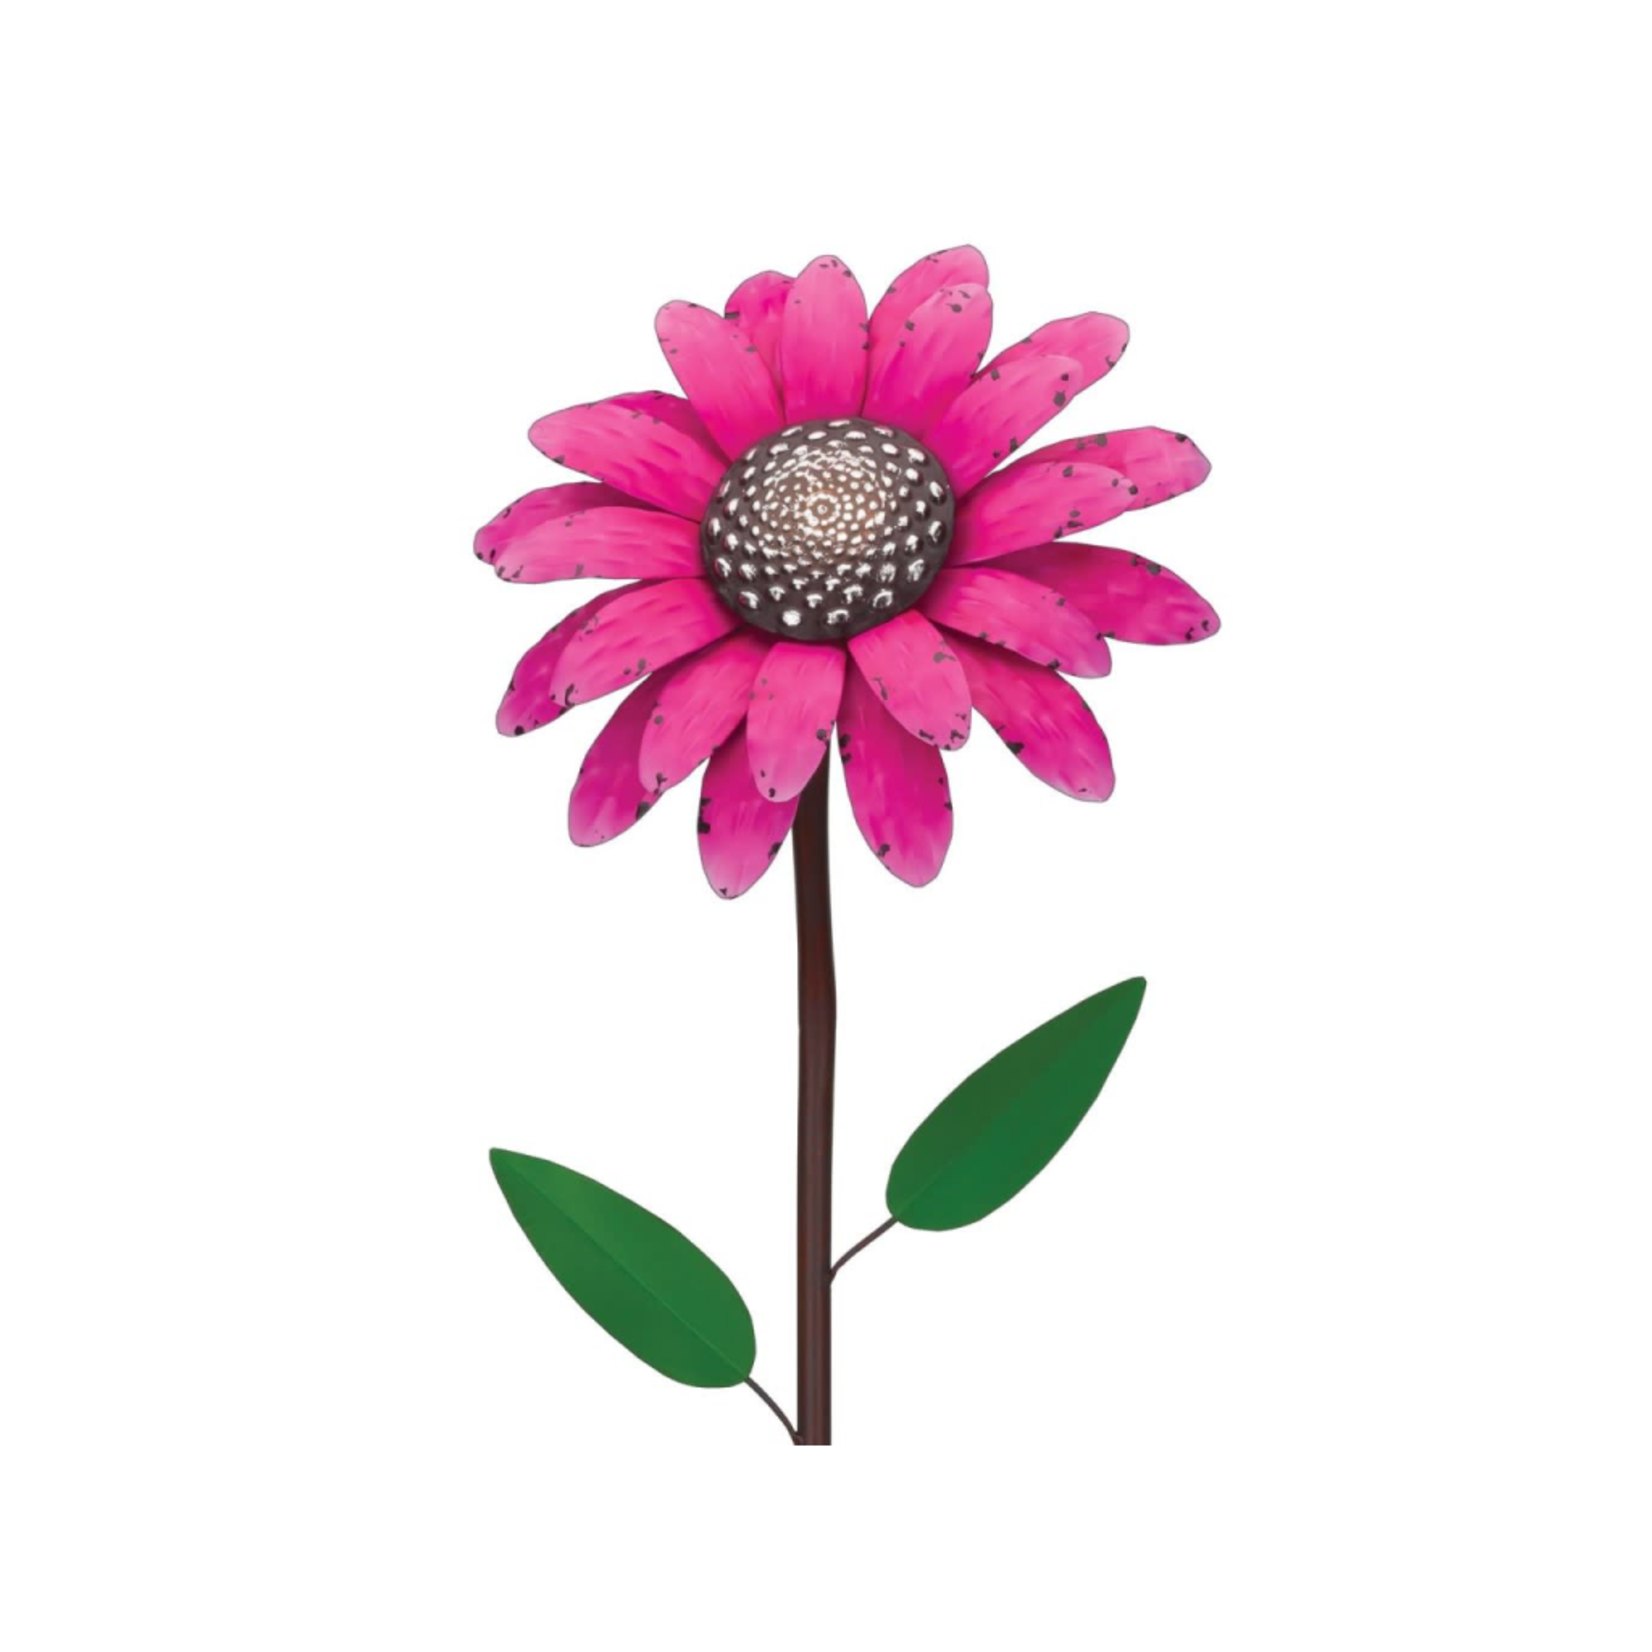 Vintage Flower Stake - Pink Daisy 46''